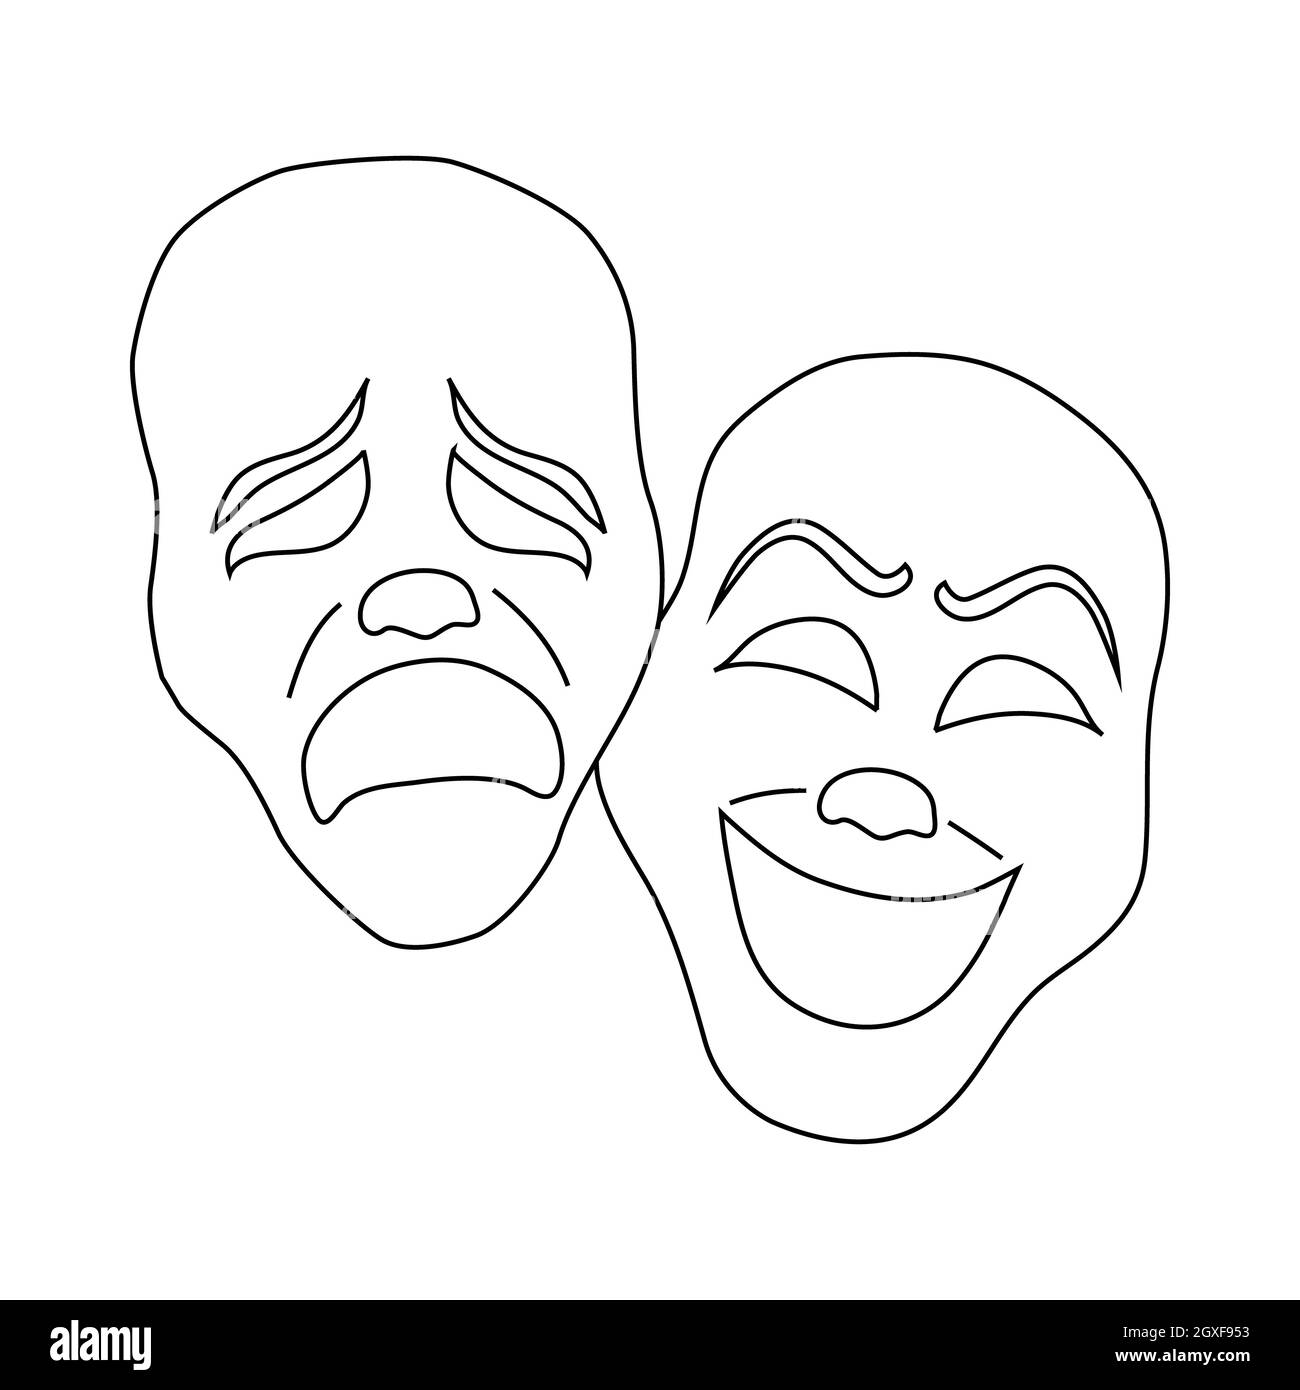 Theater masks linear icon on white background Vector Image